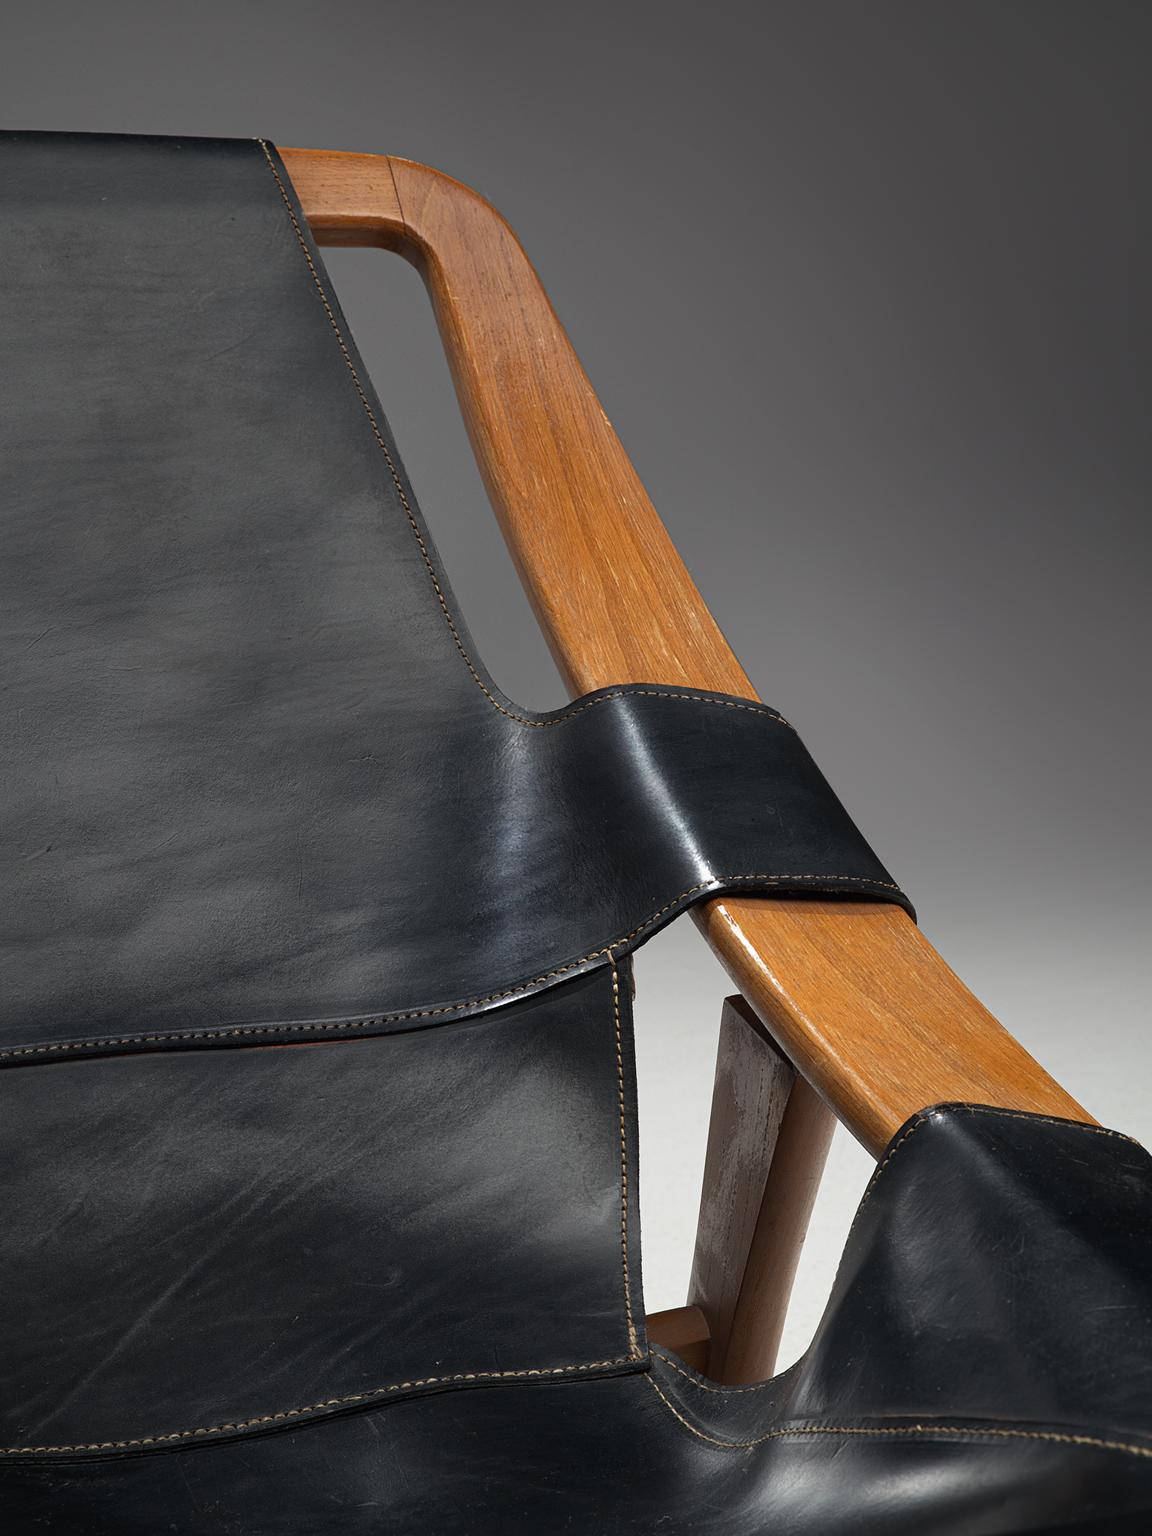 Arne Tidemand Ruud for Norcraft 'Holmkollen' Lounge Chair in Black Leather 1